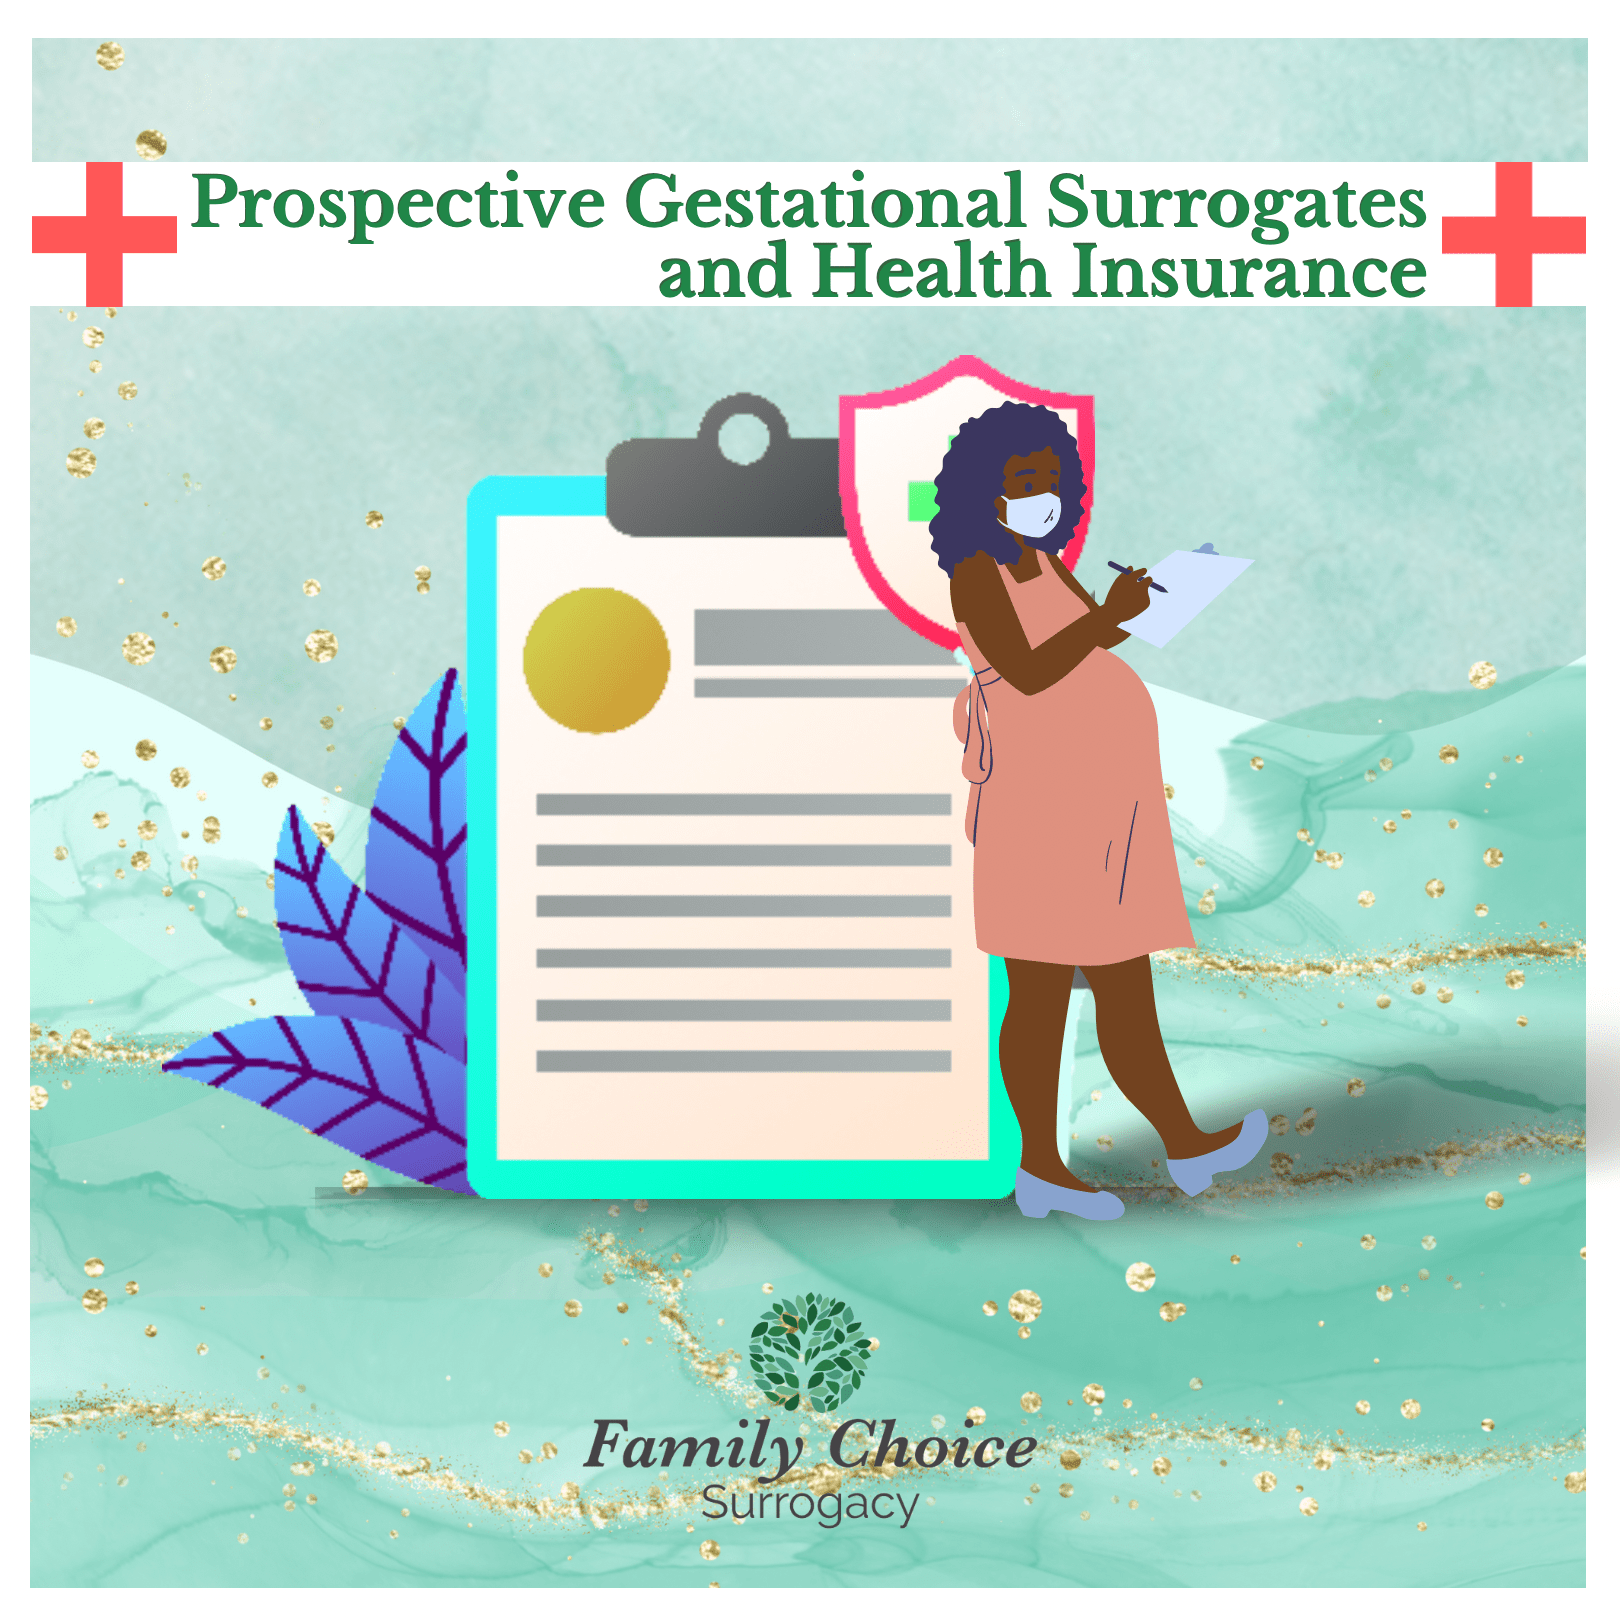 Prospective Gestational Surrogates and Health Insurance, Pregnant woman signing paperwork, Surrogacy and health insurance